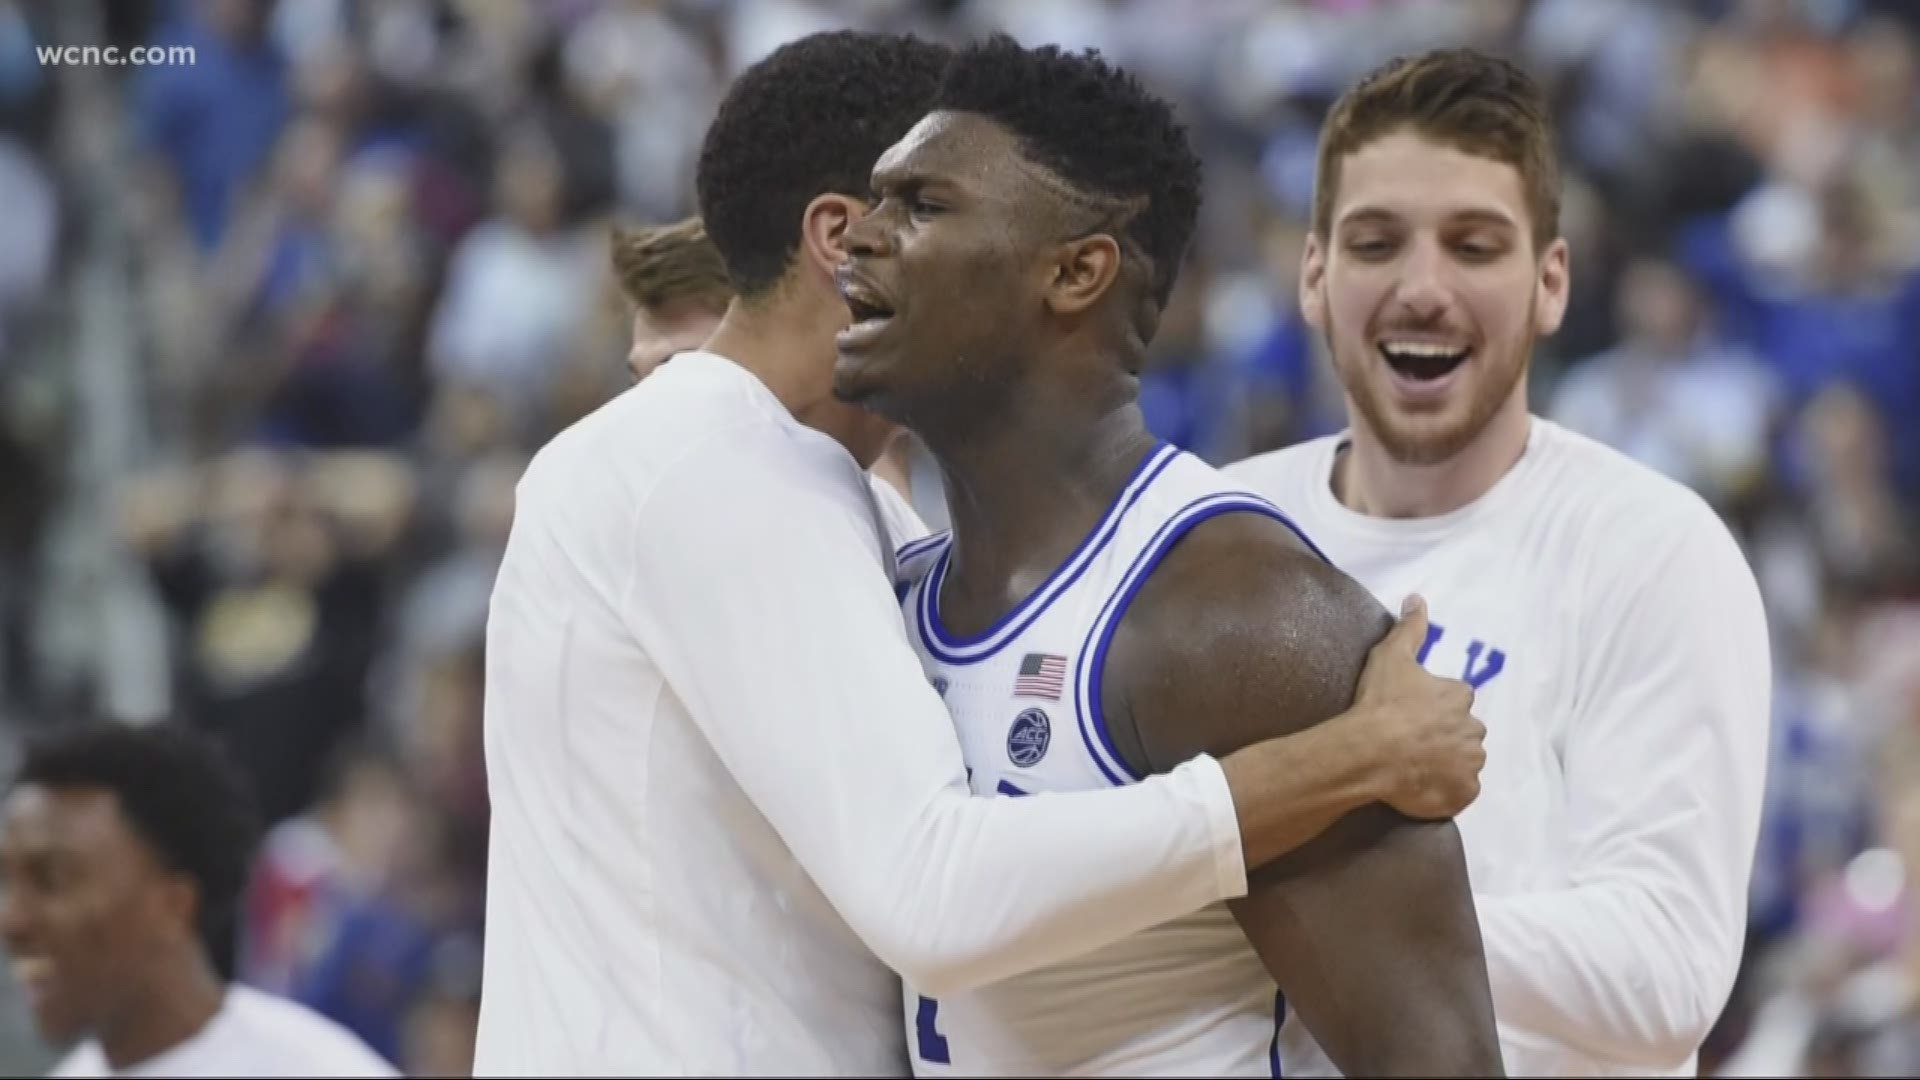 Duke stand-out Zion Williamson knew that could've been the end of the road for them, so he's thankful despite the close call.